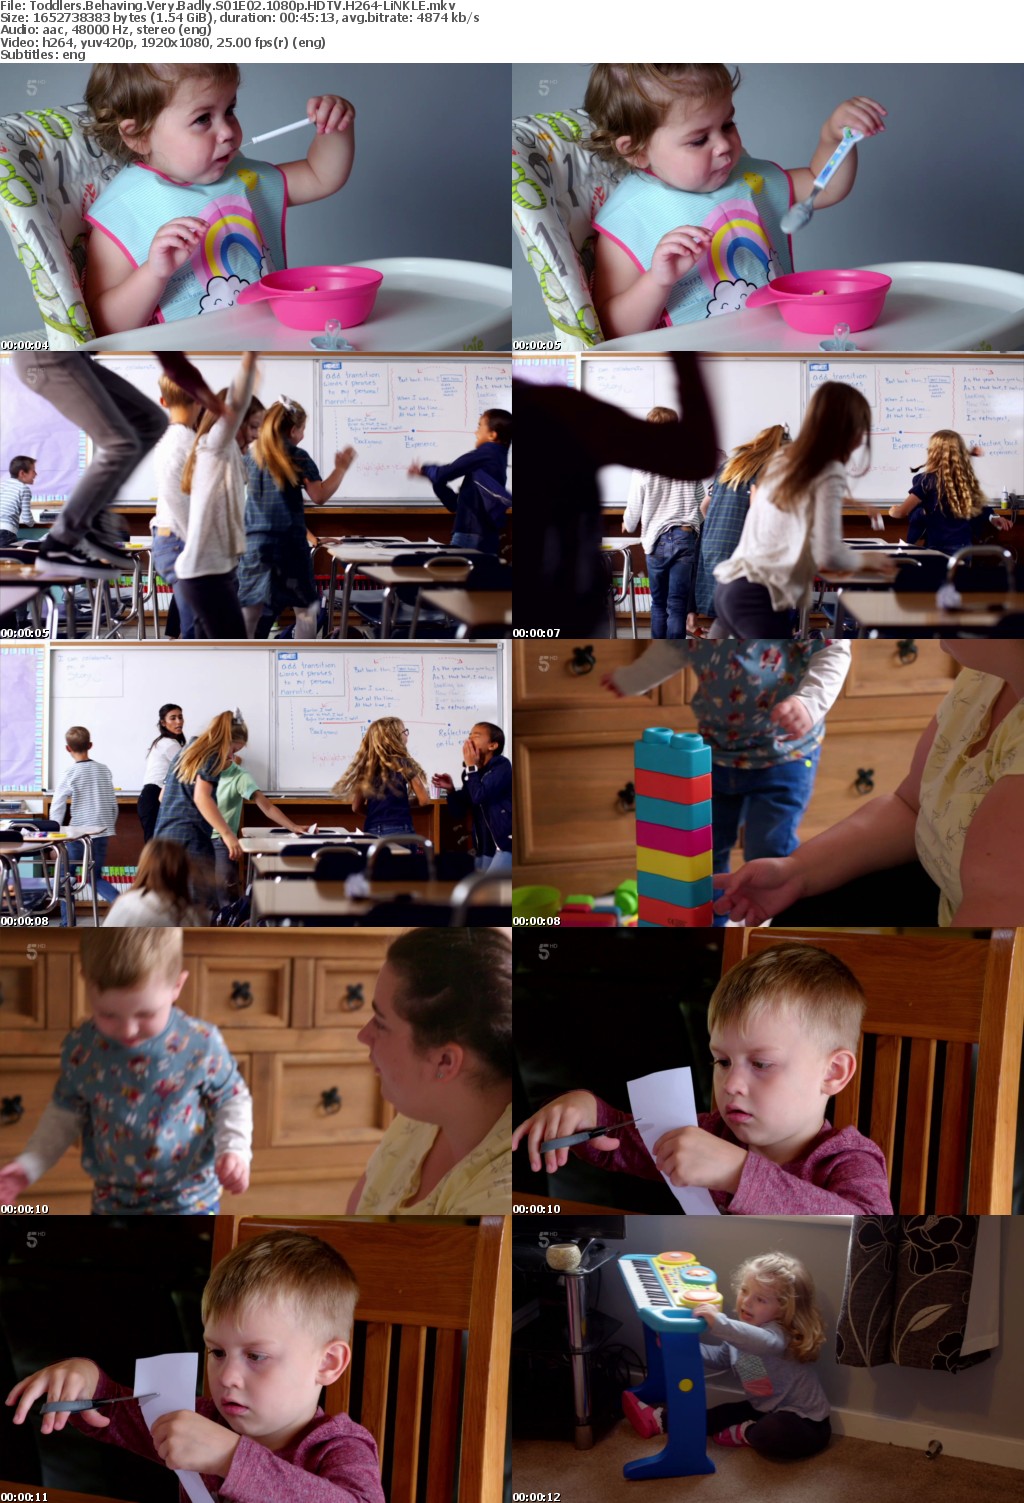 Toddlers Behaving Very Badly S01 1080p HDTV H264-LE